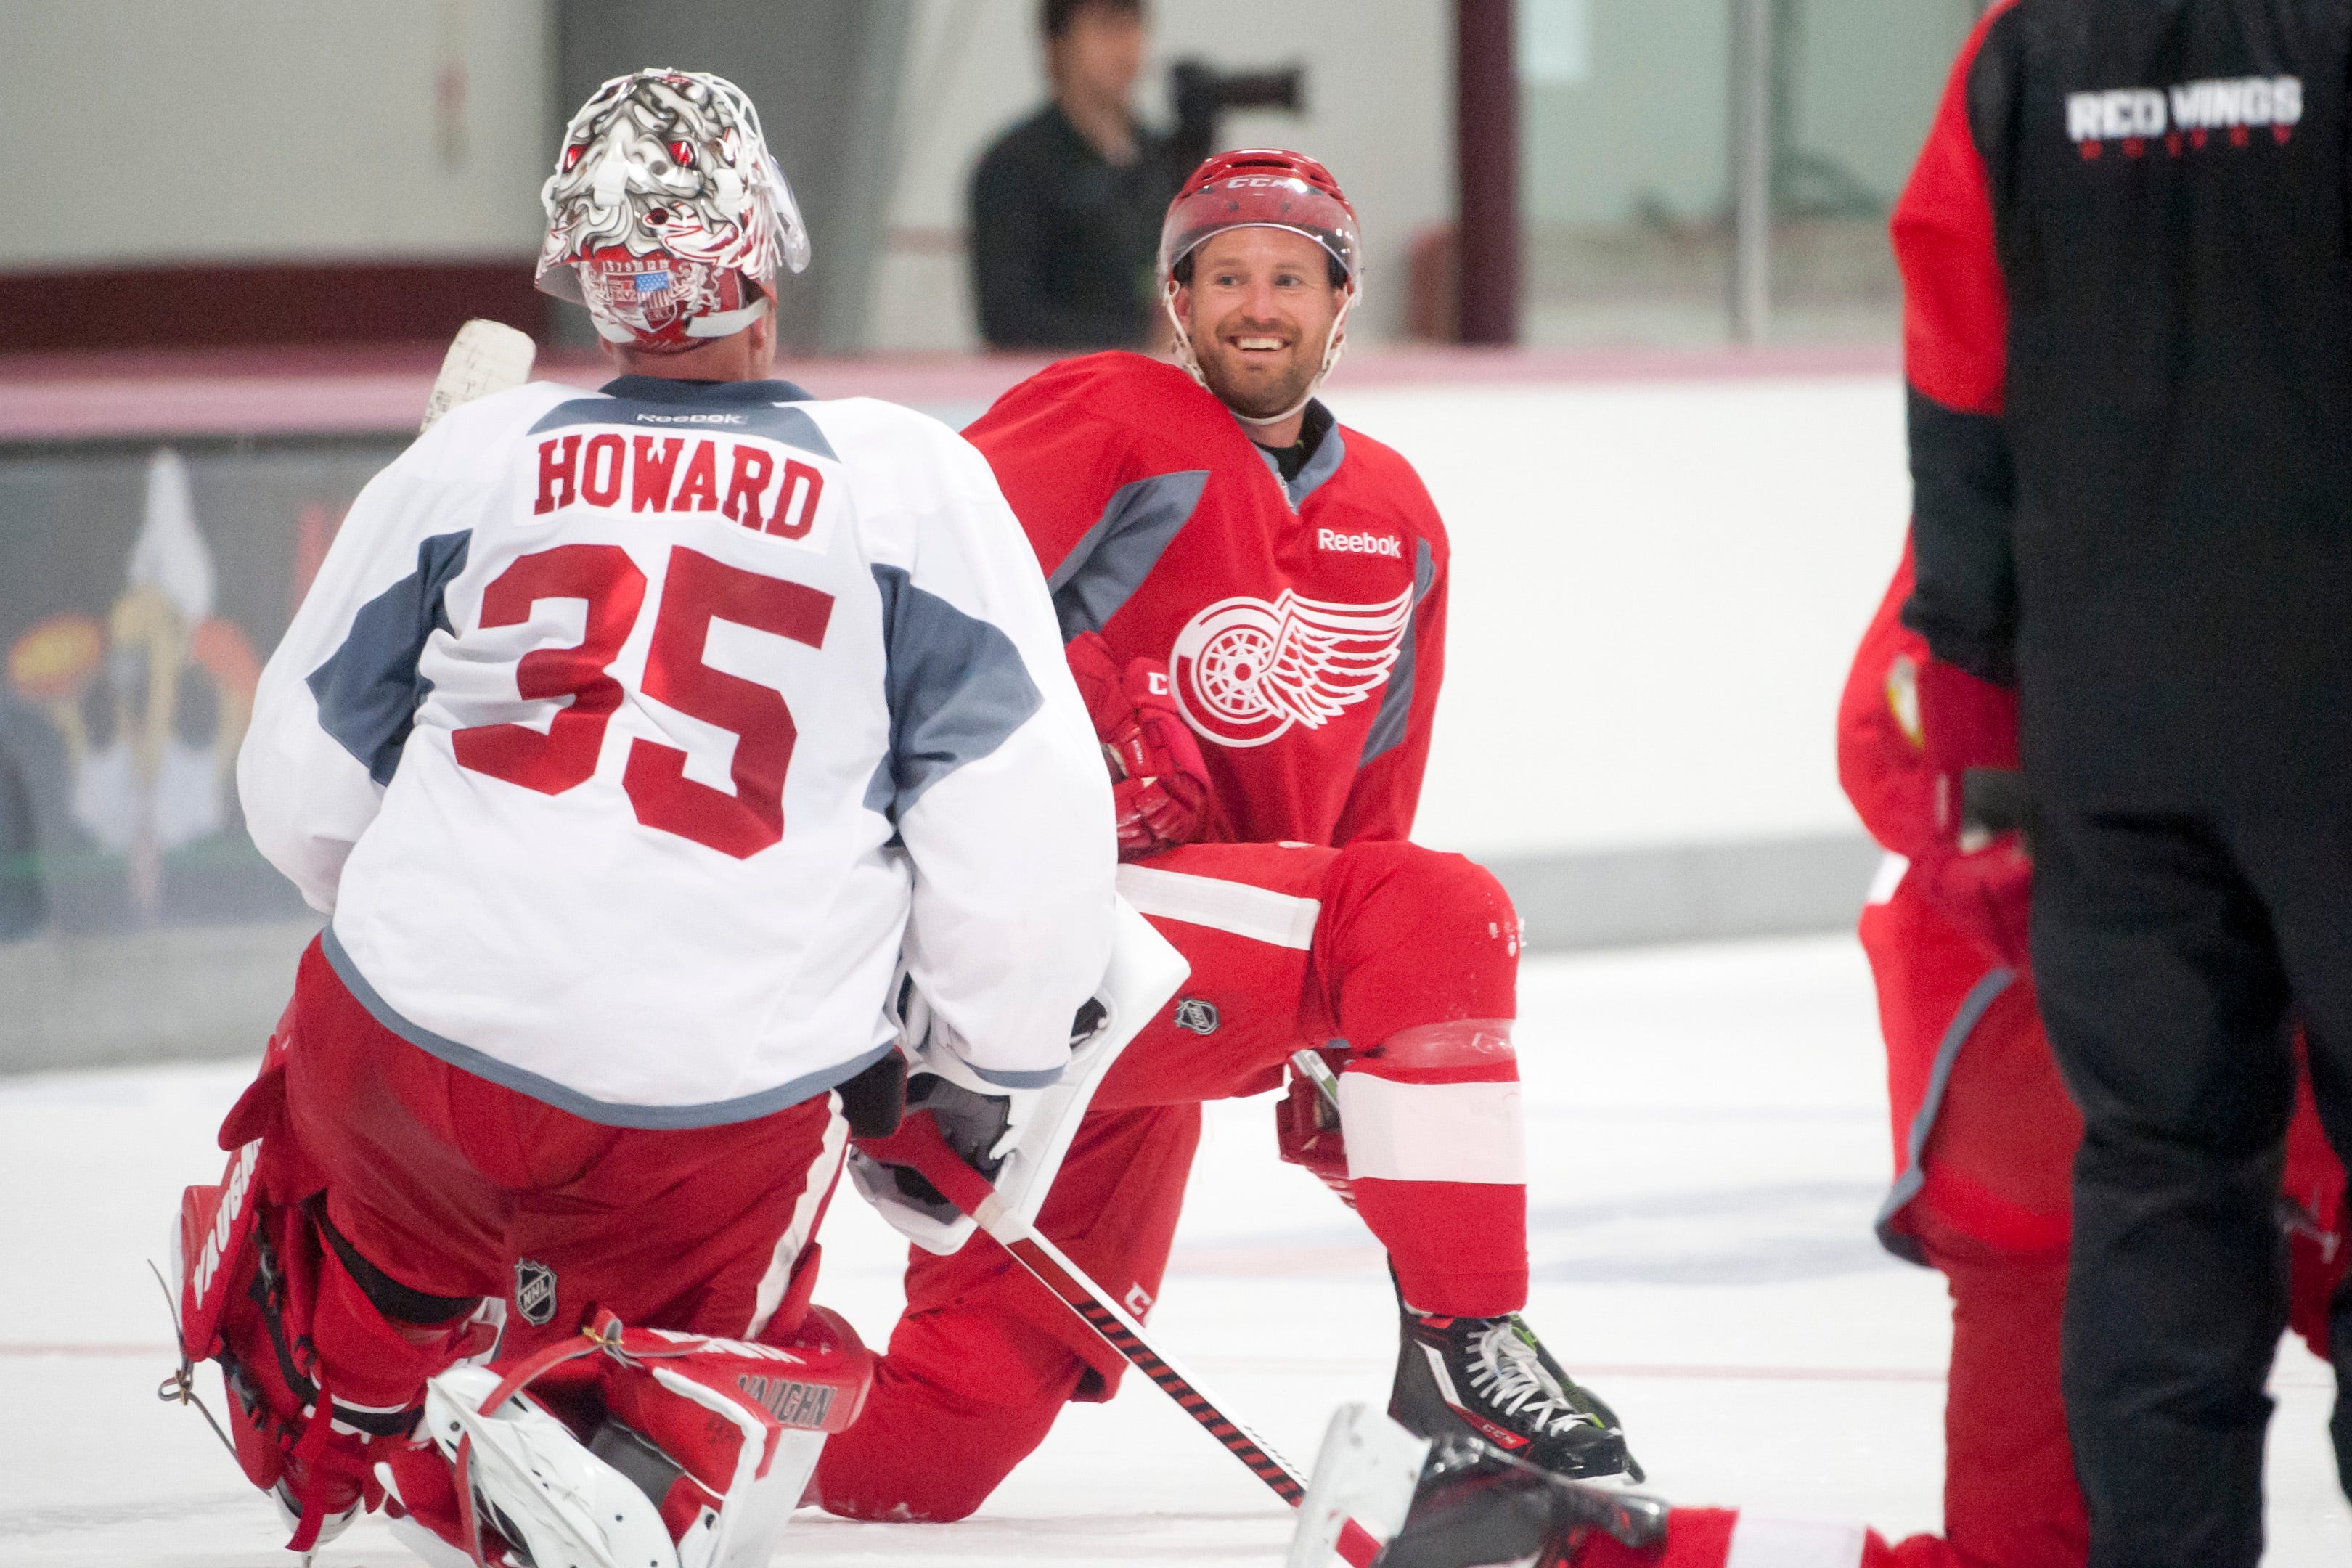 Niklas Kronwall shares a laugh with goalie Jimmy Howard while stretching at training camp at Centre Ice Arena in Traverse City on Sept. 18, 2015.